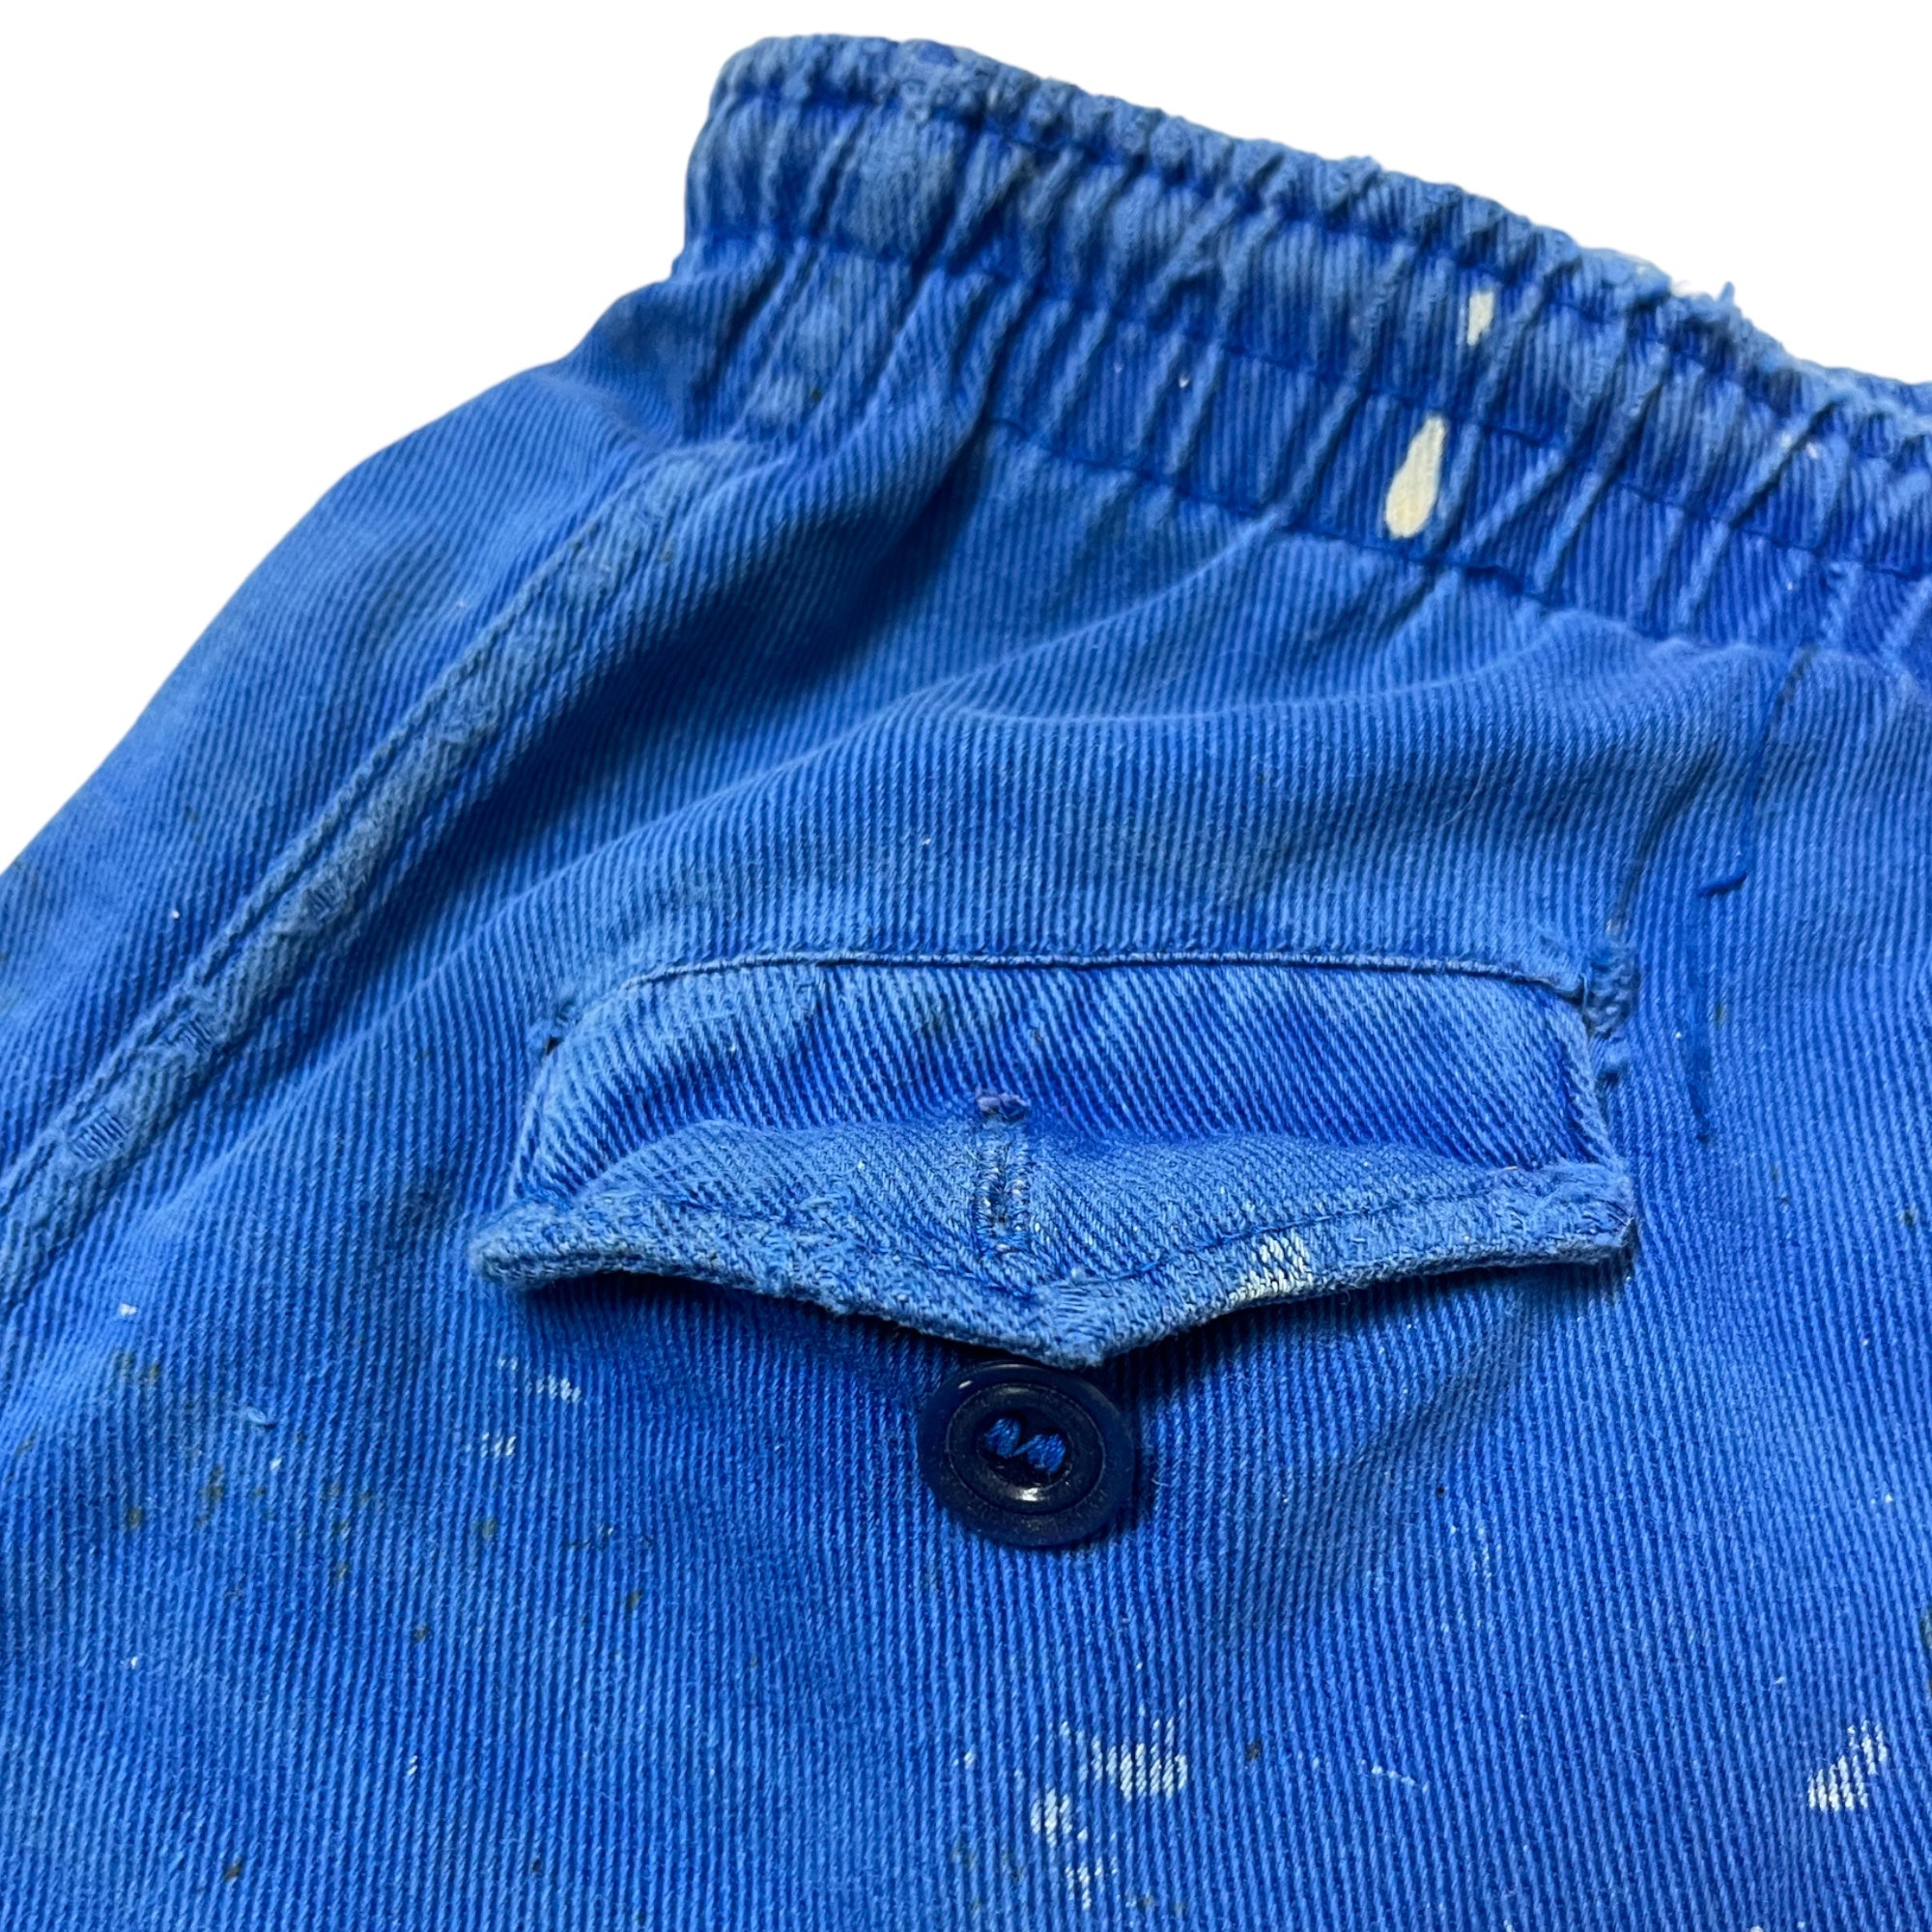 Distressed Early 60s Short Shorts with Button Pocket - Faded Blue - Adjustable 30-36”